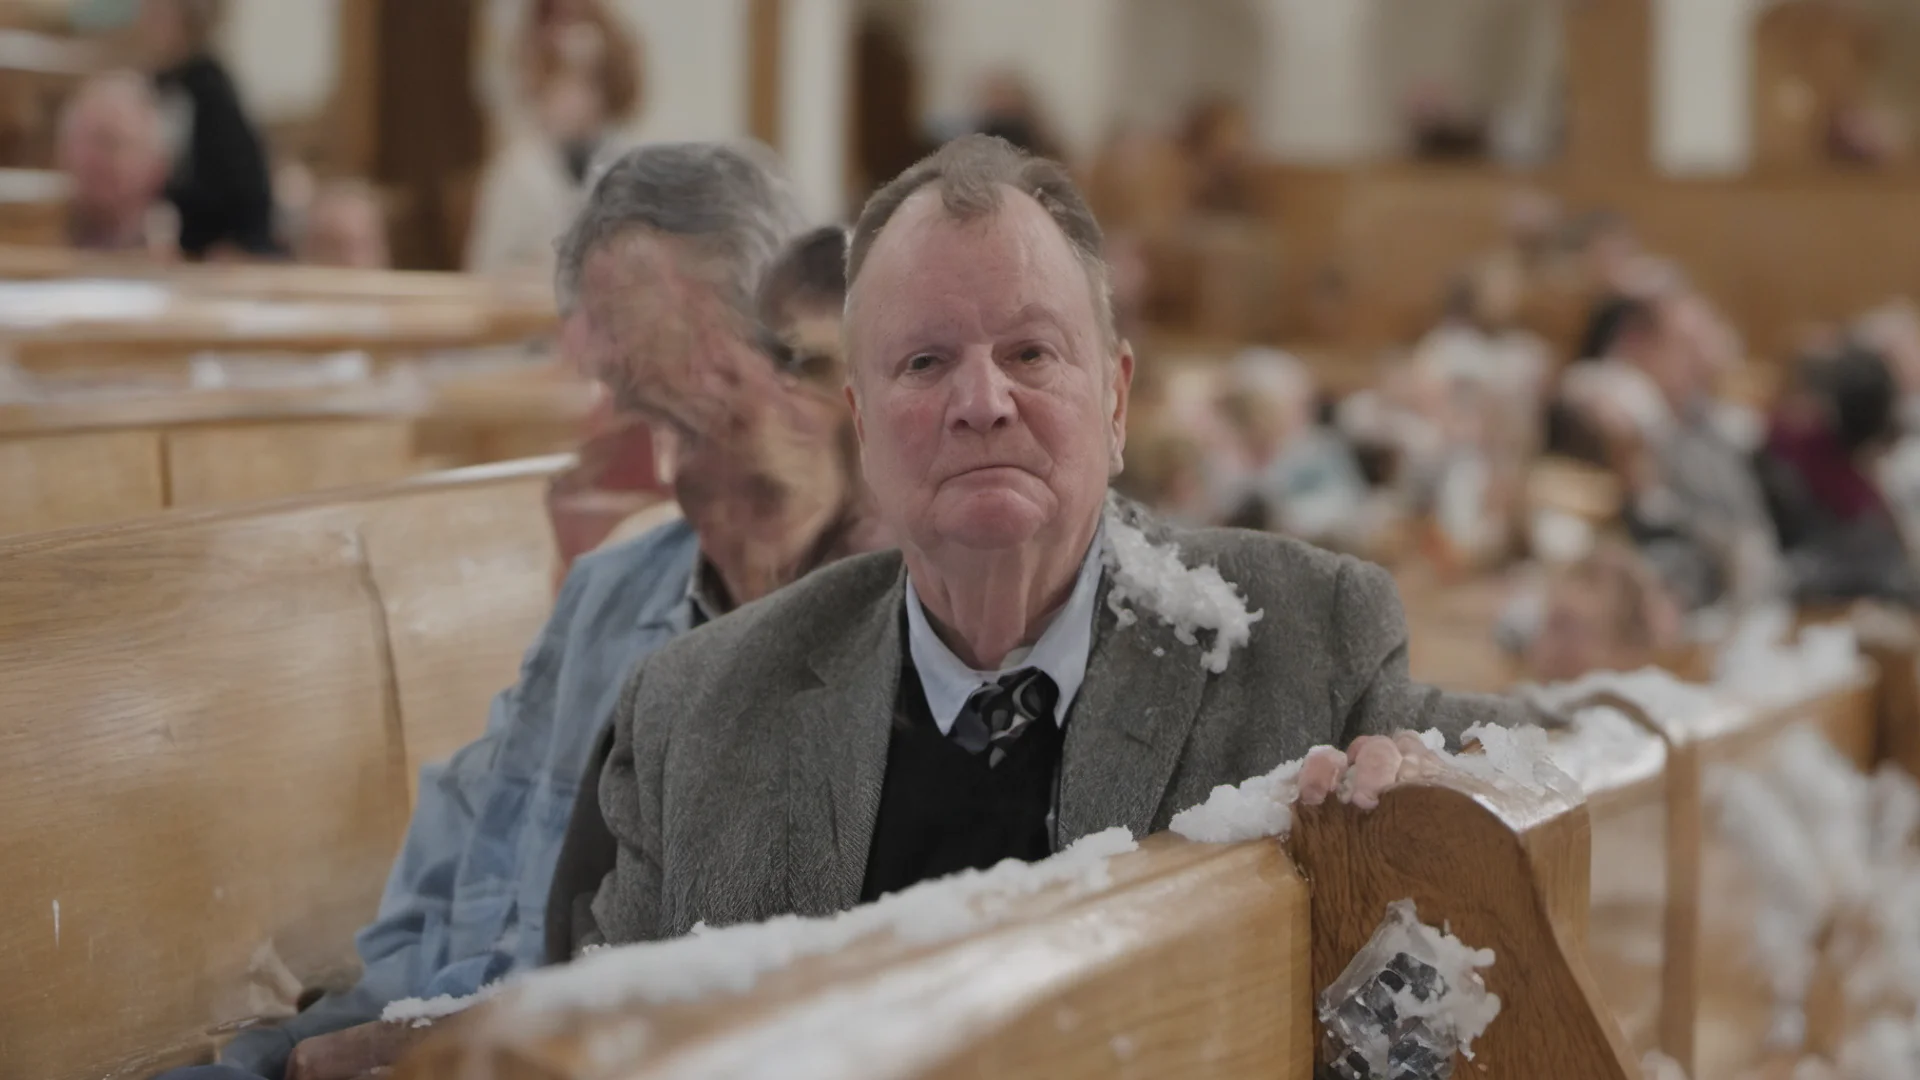 endeavor photographic of new england parishioner sitting on pew of church that just got air conditioning that is so cold there are icicles forming on his brow amazing awesome portrait 2 wide